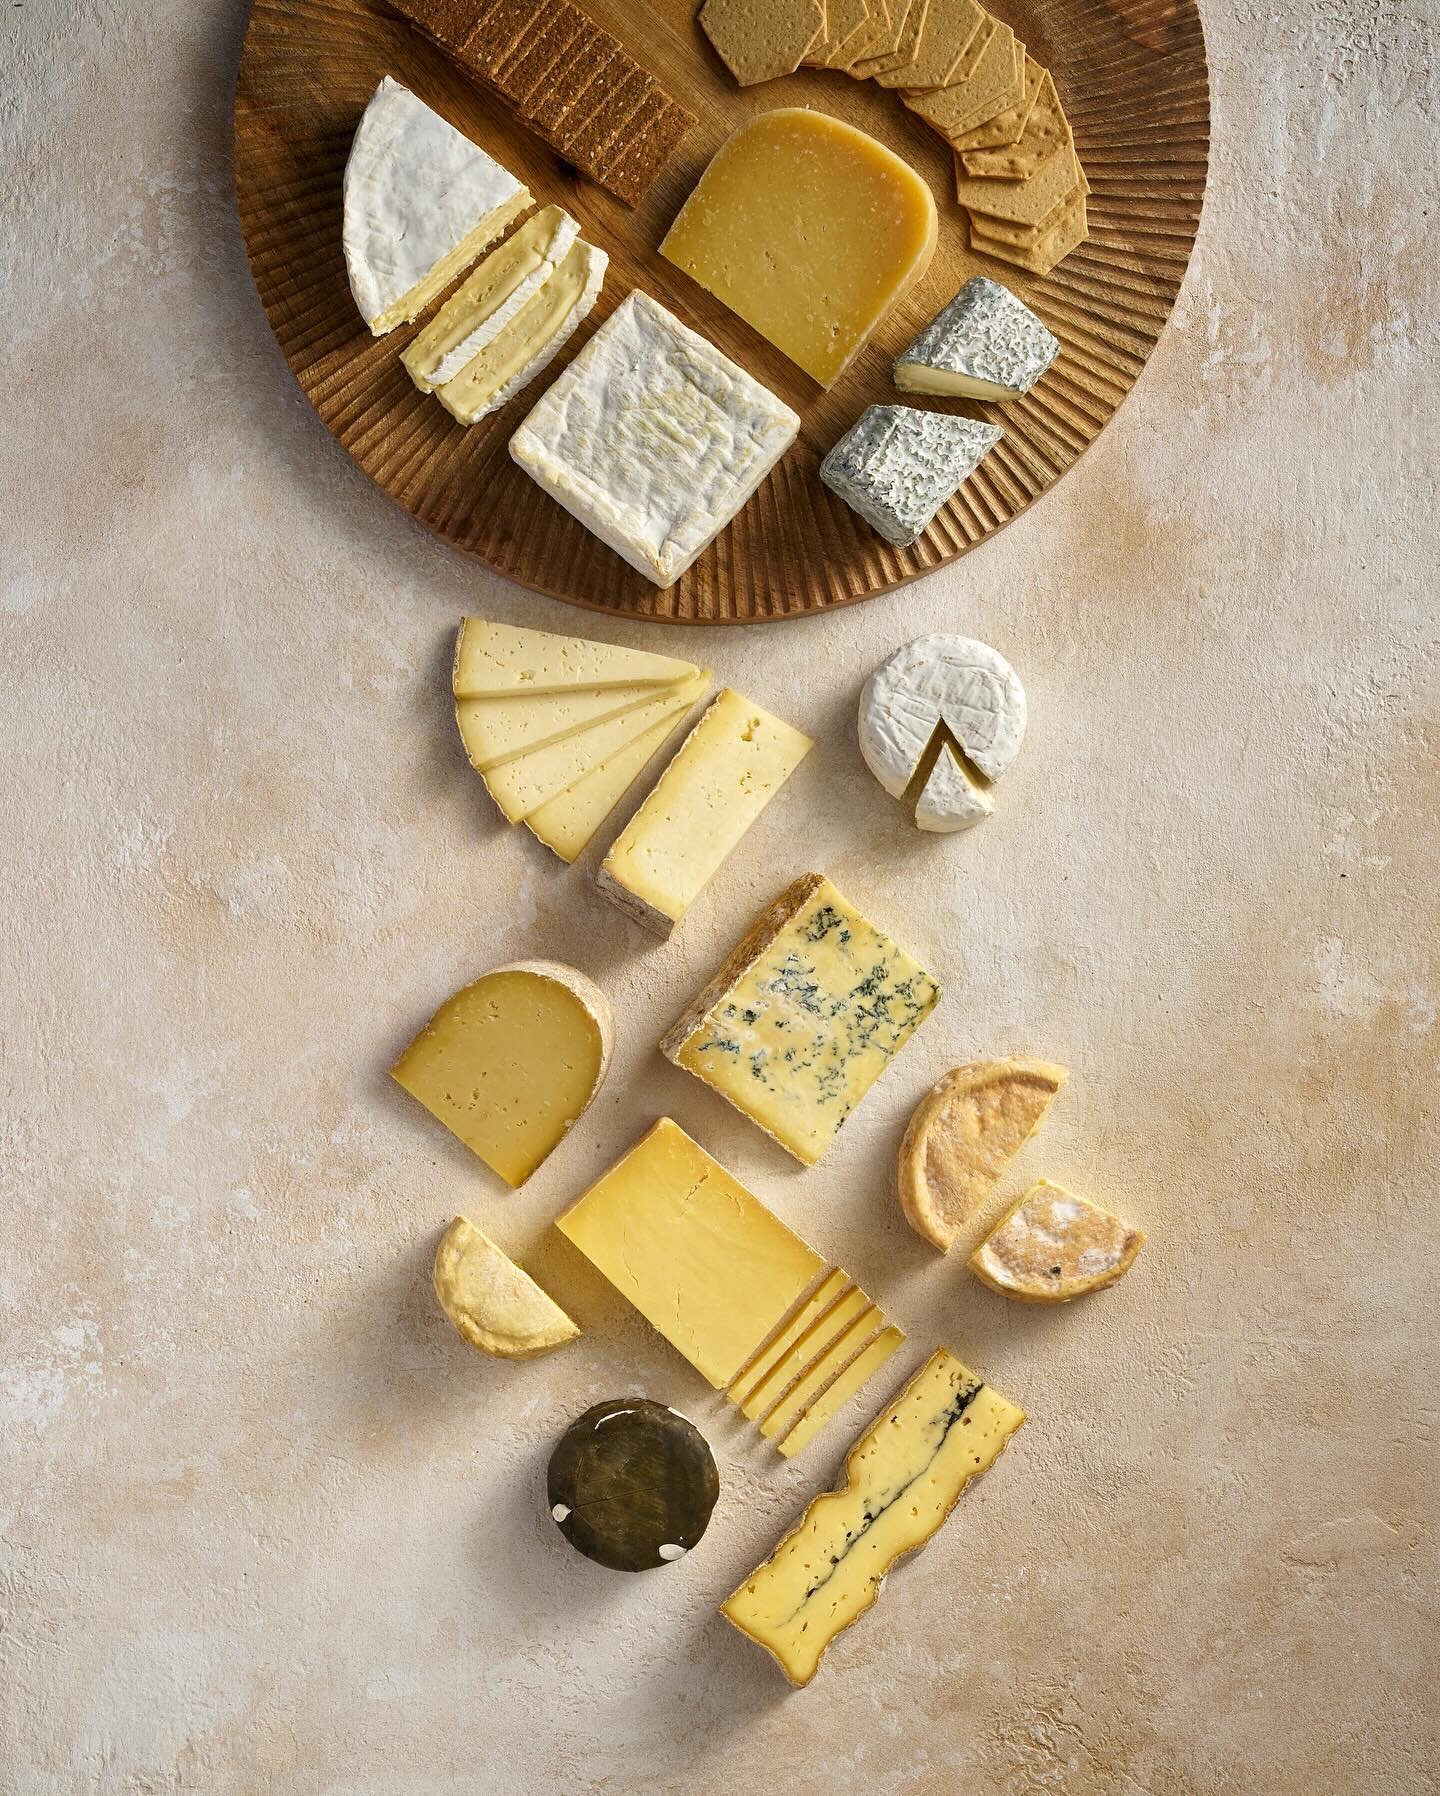 #bigcheese post! If there&rsquo;s one thing to get right for Xmas it has to be good cheese!
I shot and tasted 35 cheeses for @shopthenewt recently, just so you know which ones to get 😂 I can assure all these are great!

Styled by  @helenupshall 
Wit